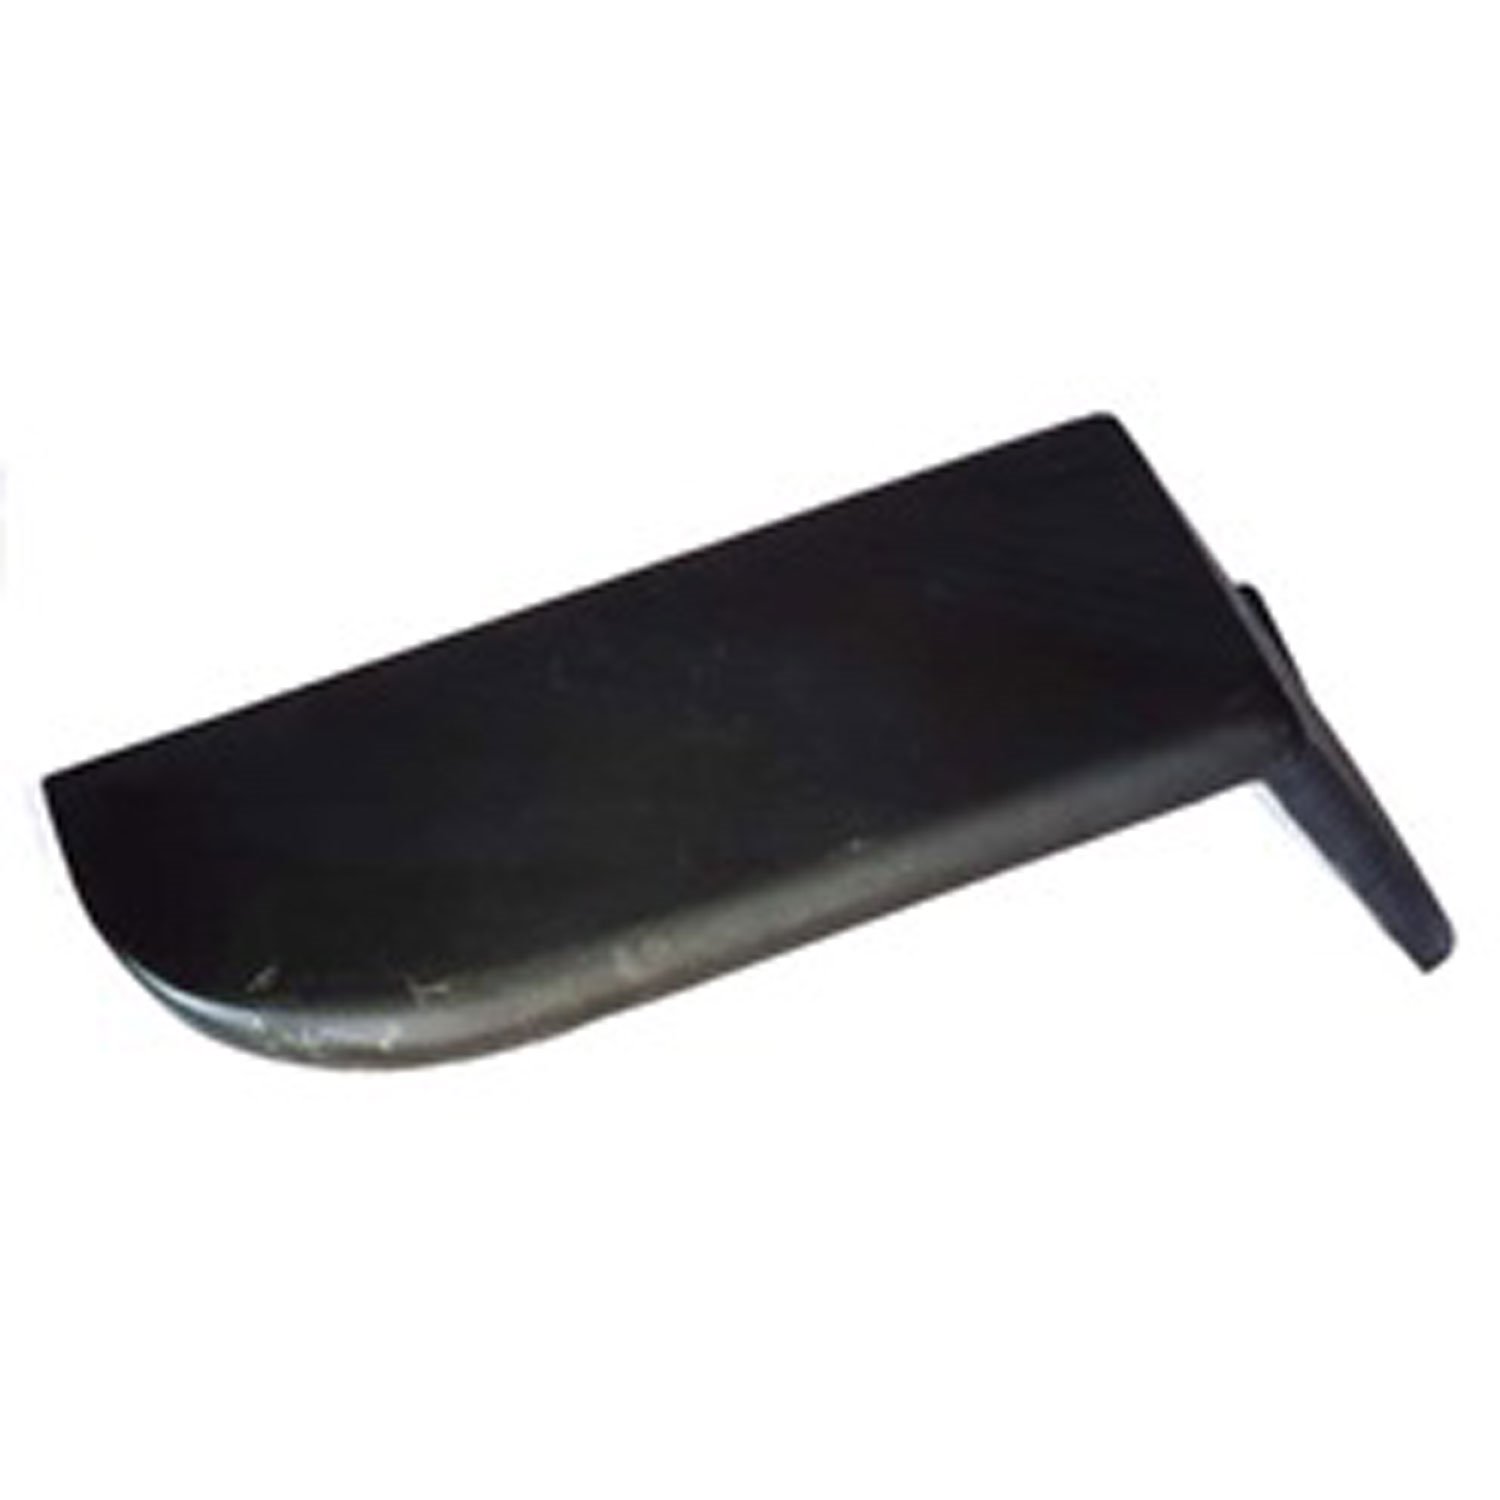 Replacement front fender from Omix-ADA, Fits left side of 49-53 Willys CJ2A 50-52 M38 and 53-68 CJ3B.